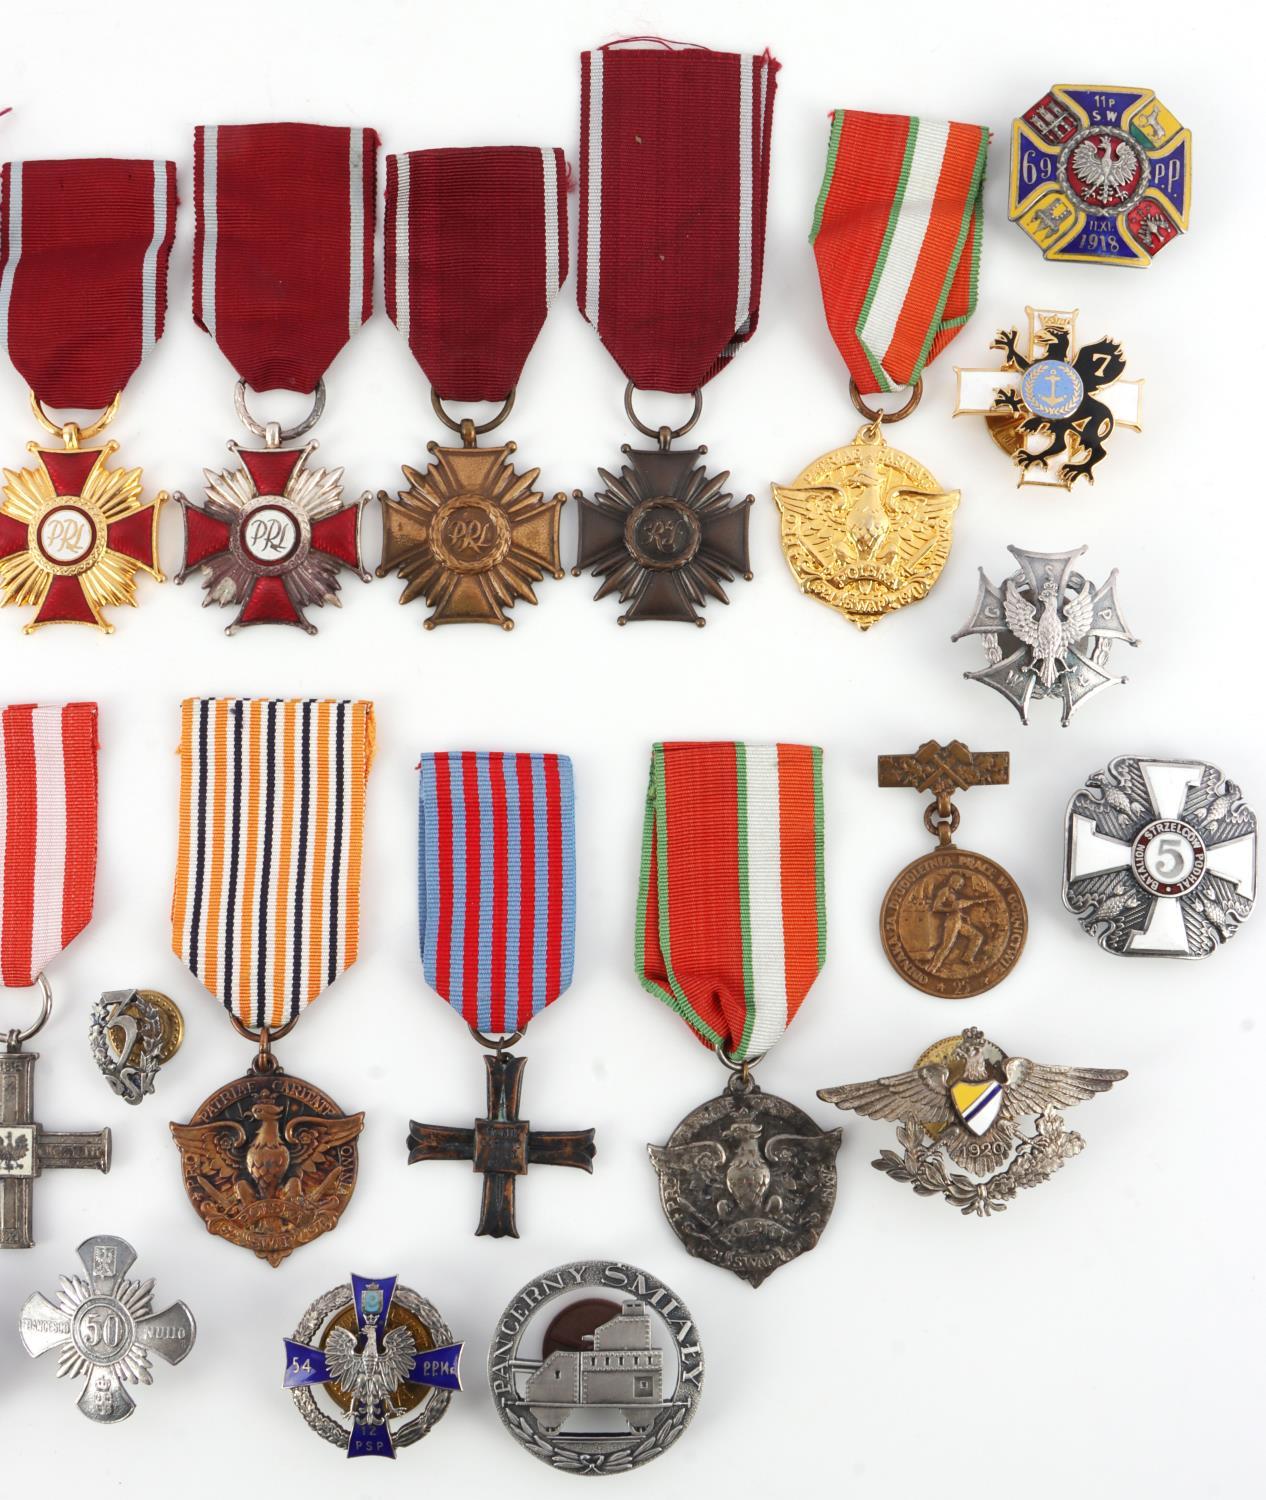 30 WWI TO POST WAR POLISH MILITARY REGIMENT MEDALS